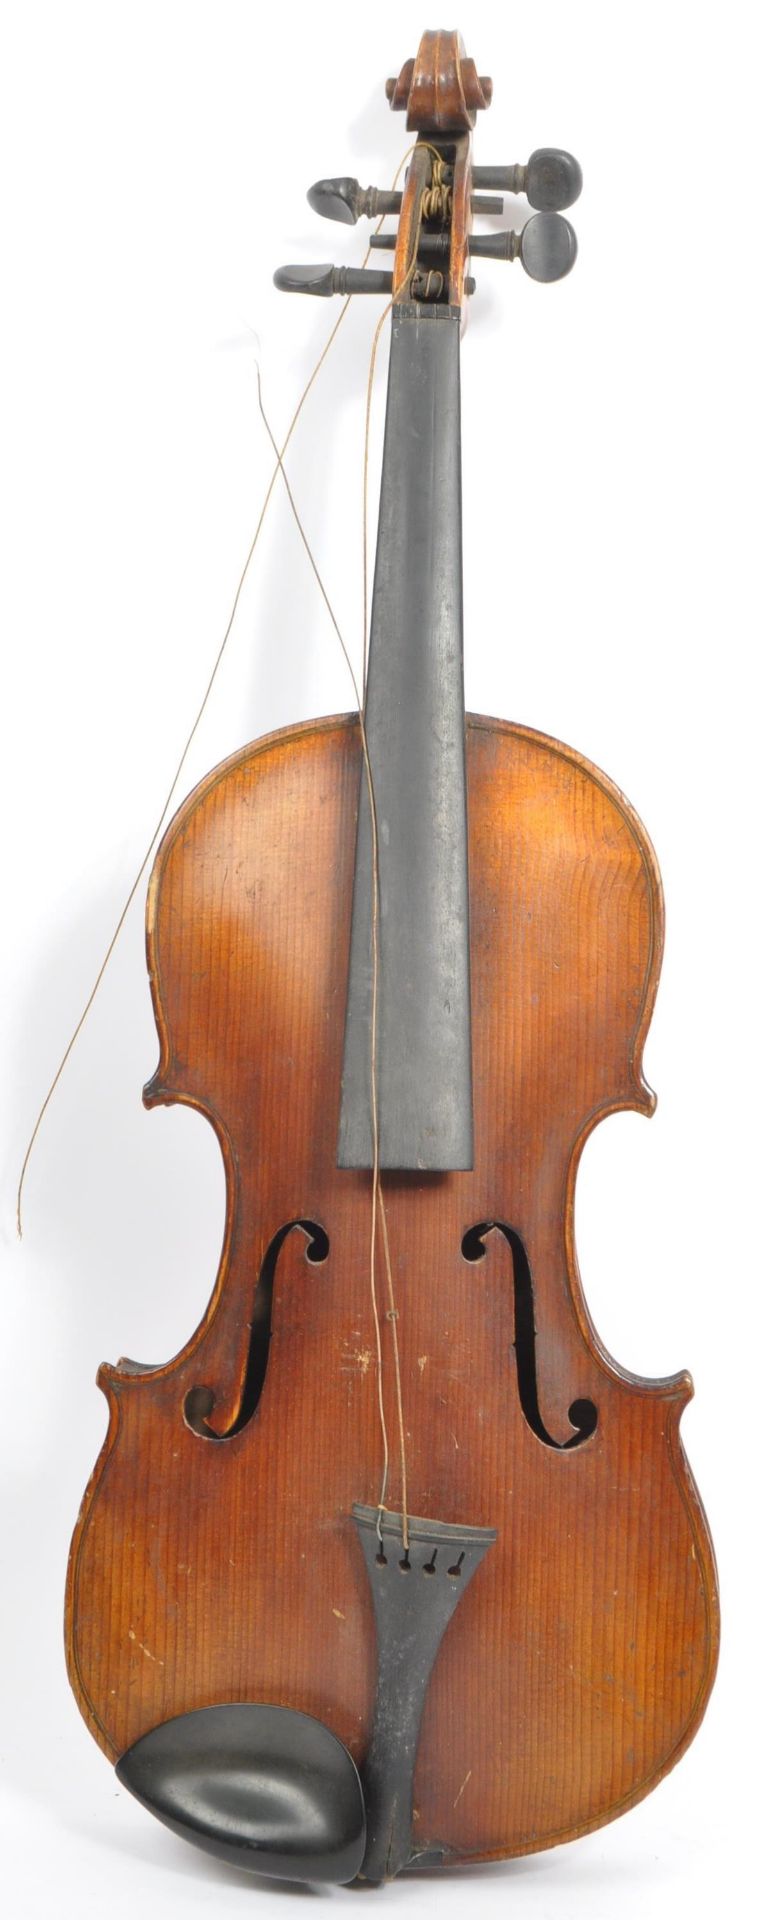 LATE 19TH / EARLY 20TH CENTURY FULL SIZE VIOLIN